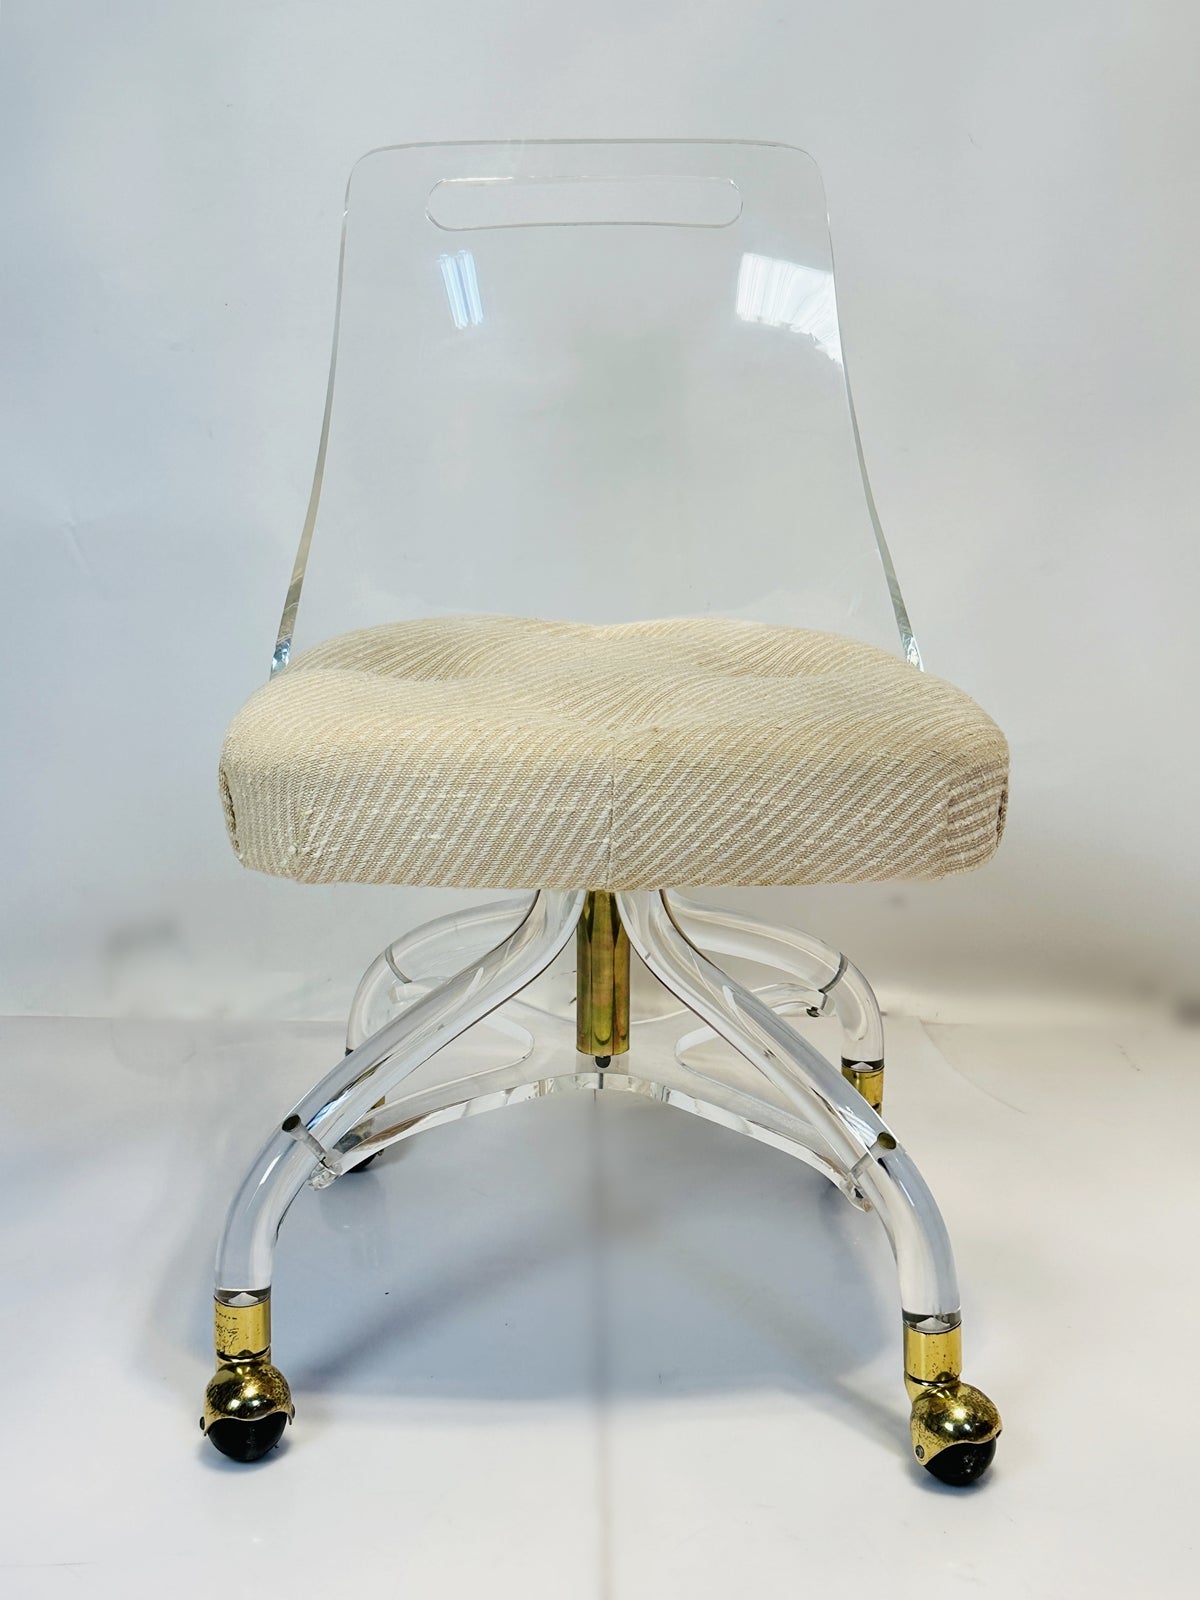 Introducing the exquisite Lucite & Brass Vanity Chair by Hill Manufacturing, a timeless piece from the USA's iconic 1960s era.

Crafted with unparalleled elegance, this chair effortlessly combines the transparency of lucite with the opulence of